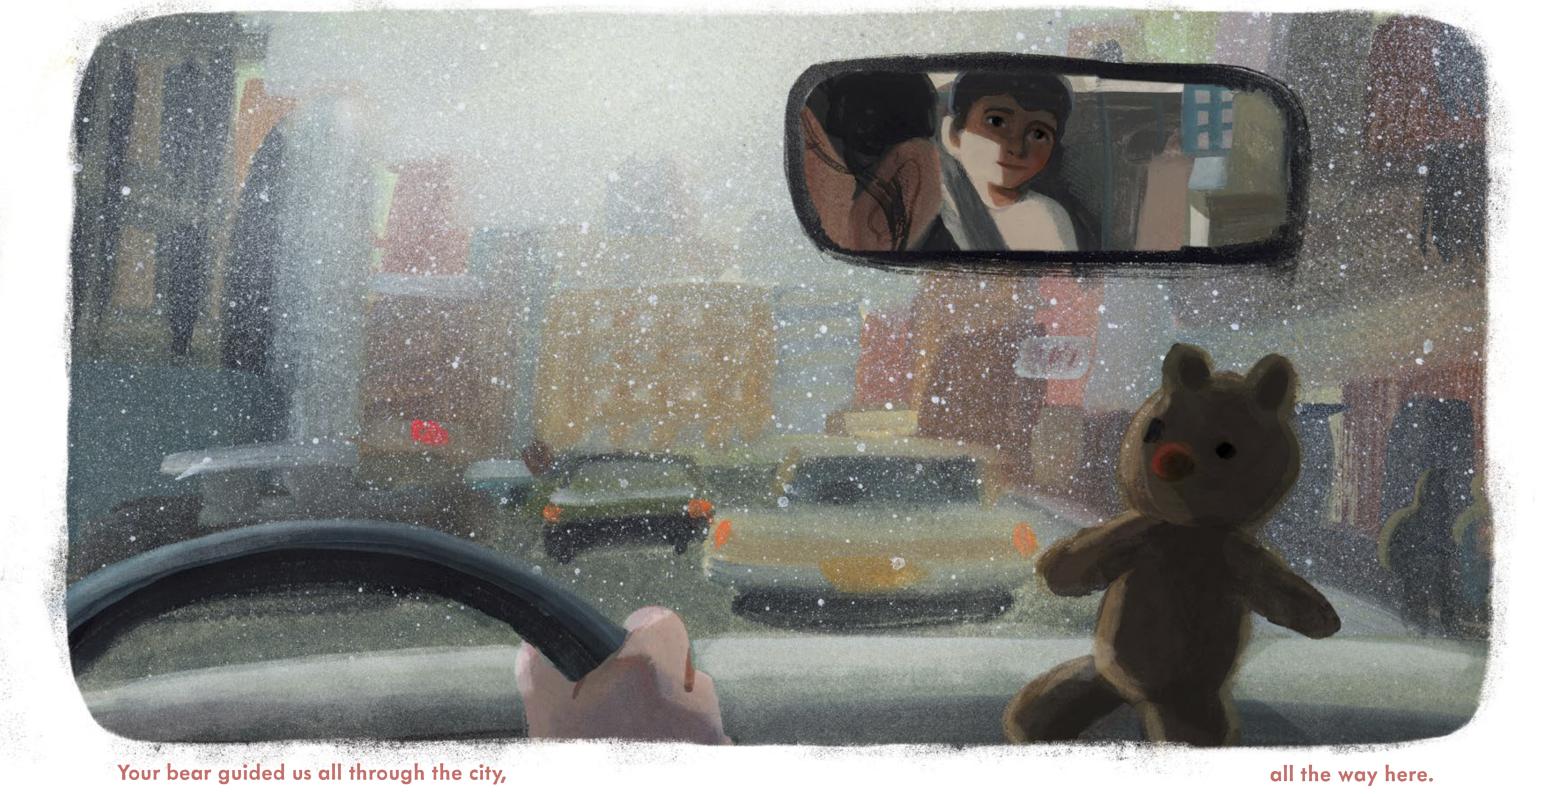 Car interior showing hand on steering wheel and teddy bear against dashboard. Rearview mirrow shows a child in the backseat. Looking out the widsheild on a snowy day.